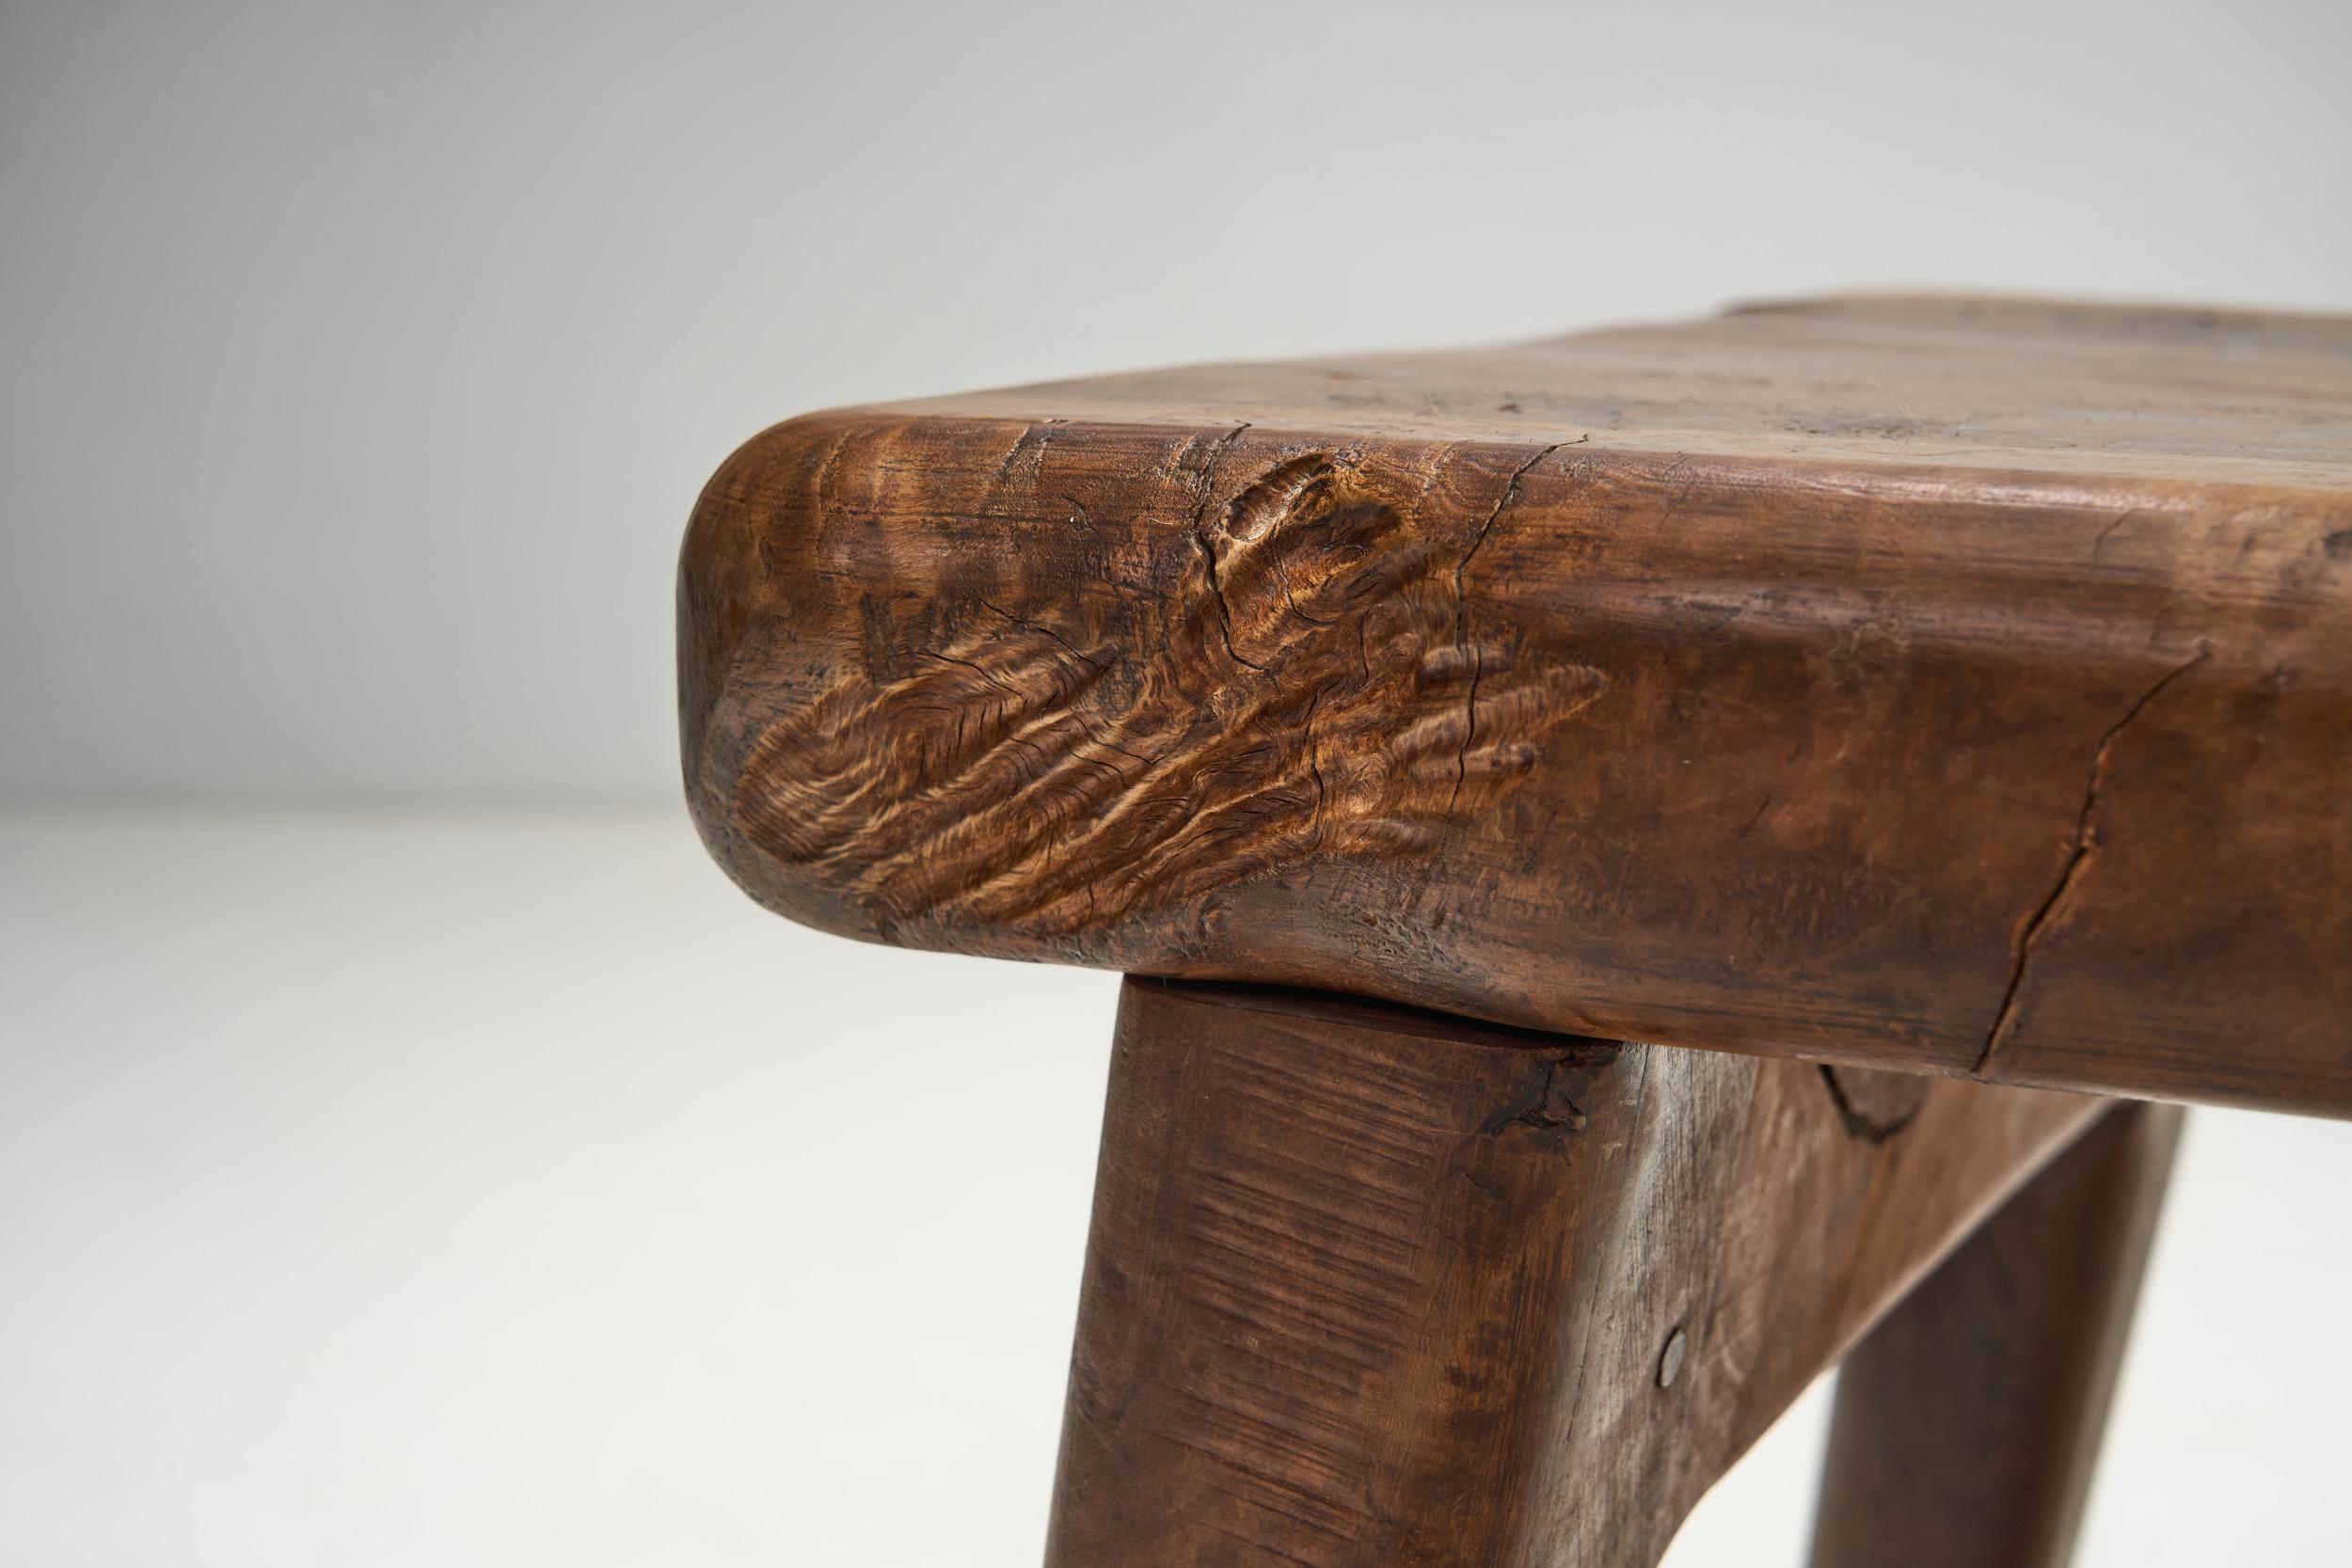 Olive Wood Sculptural High Back French Chairs, France, circa 1970s For Sale 8